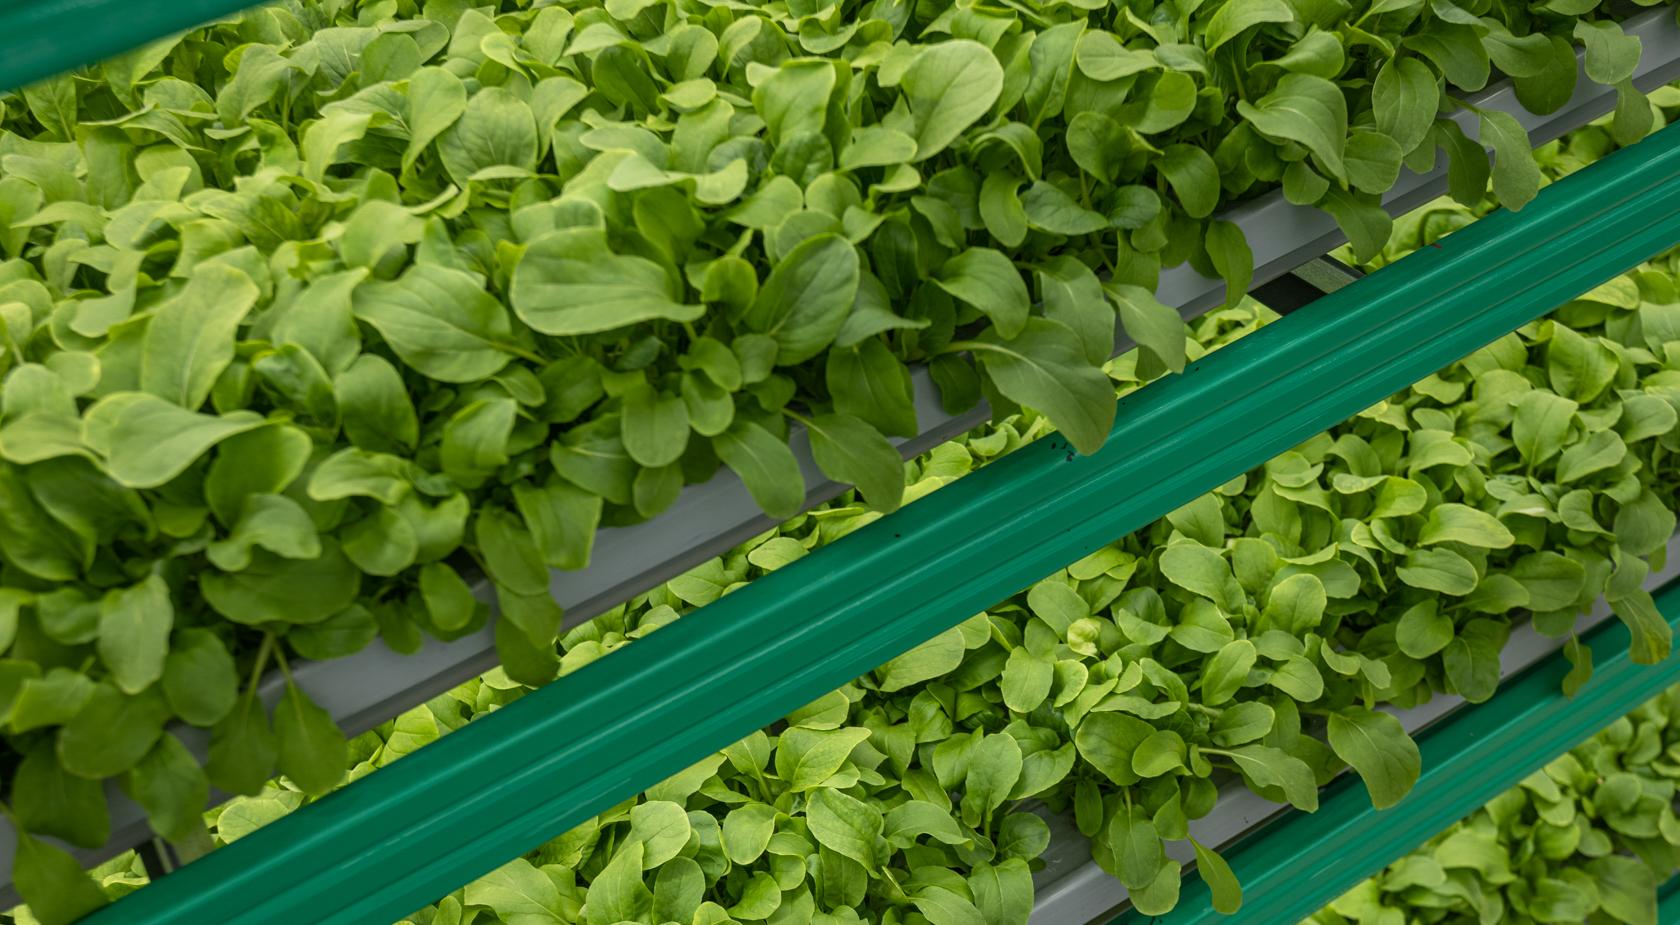 Product Grow Leafy Greens and Salads with Vertical Farming Technologies by iFarm image